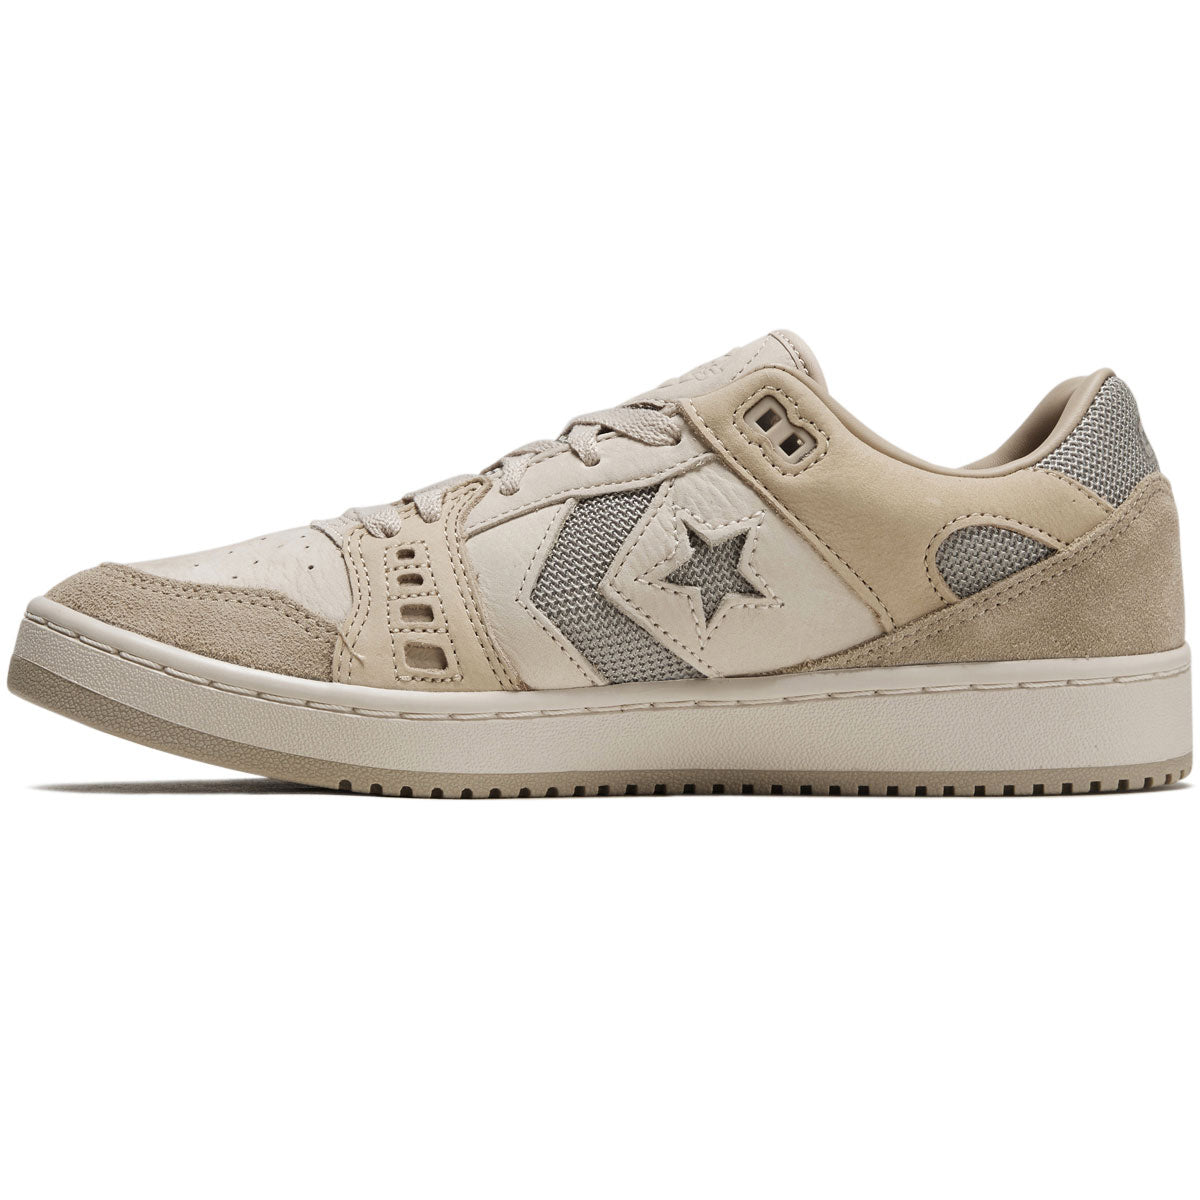 Converse AS-1 Pro Ox Shoes - Shifting Sand/Warm Sand image 2